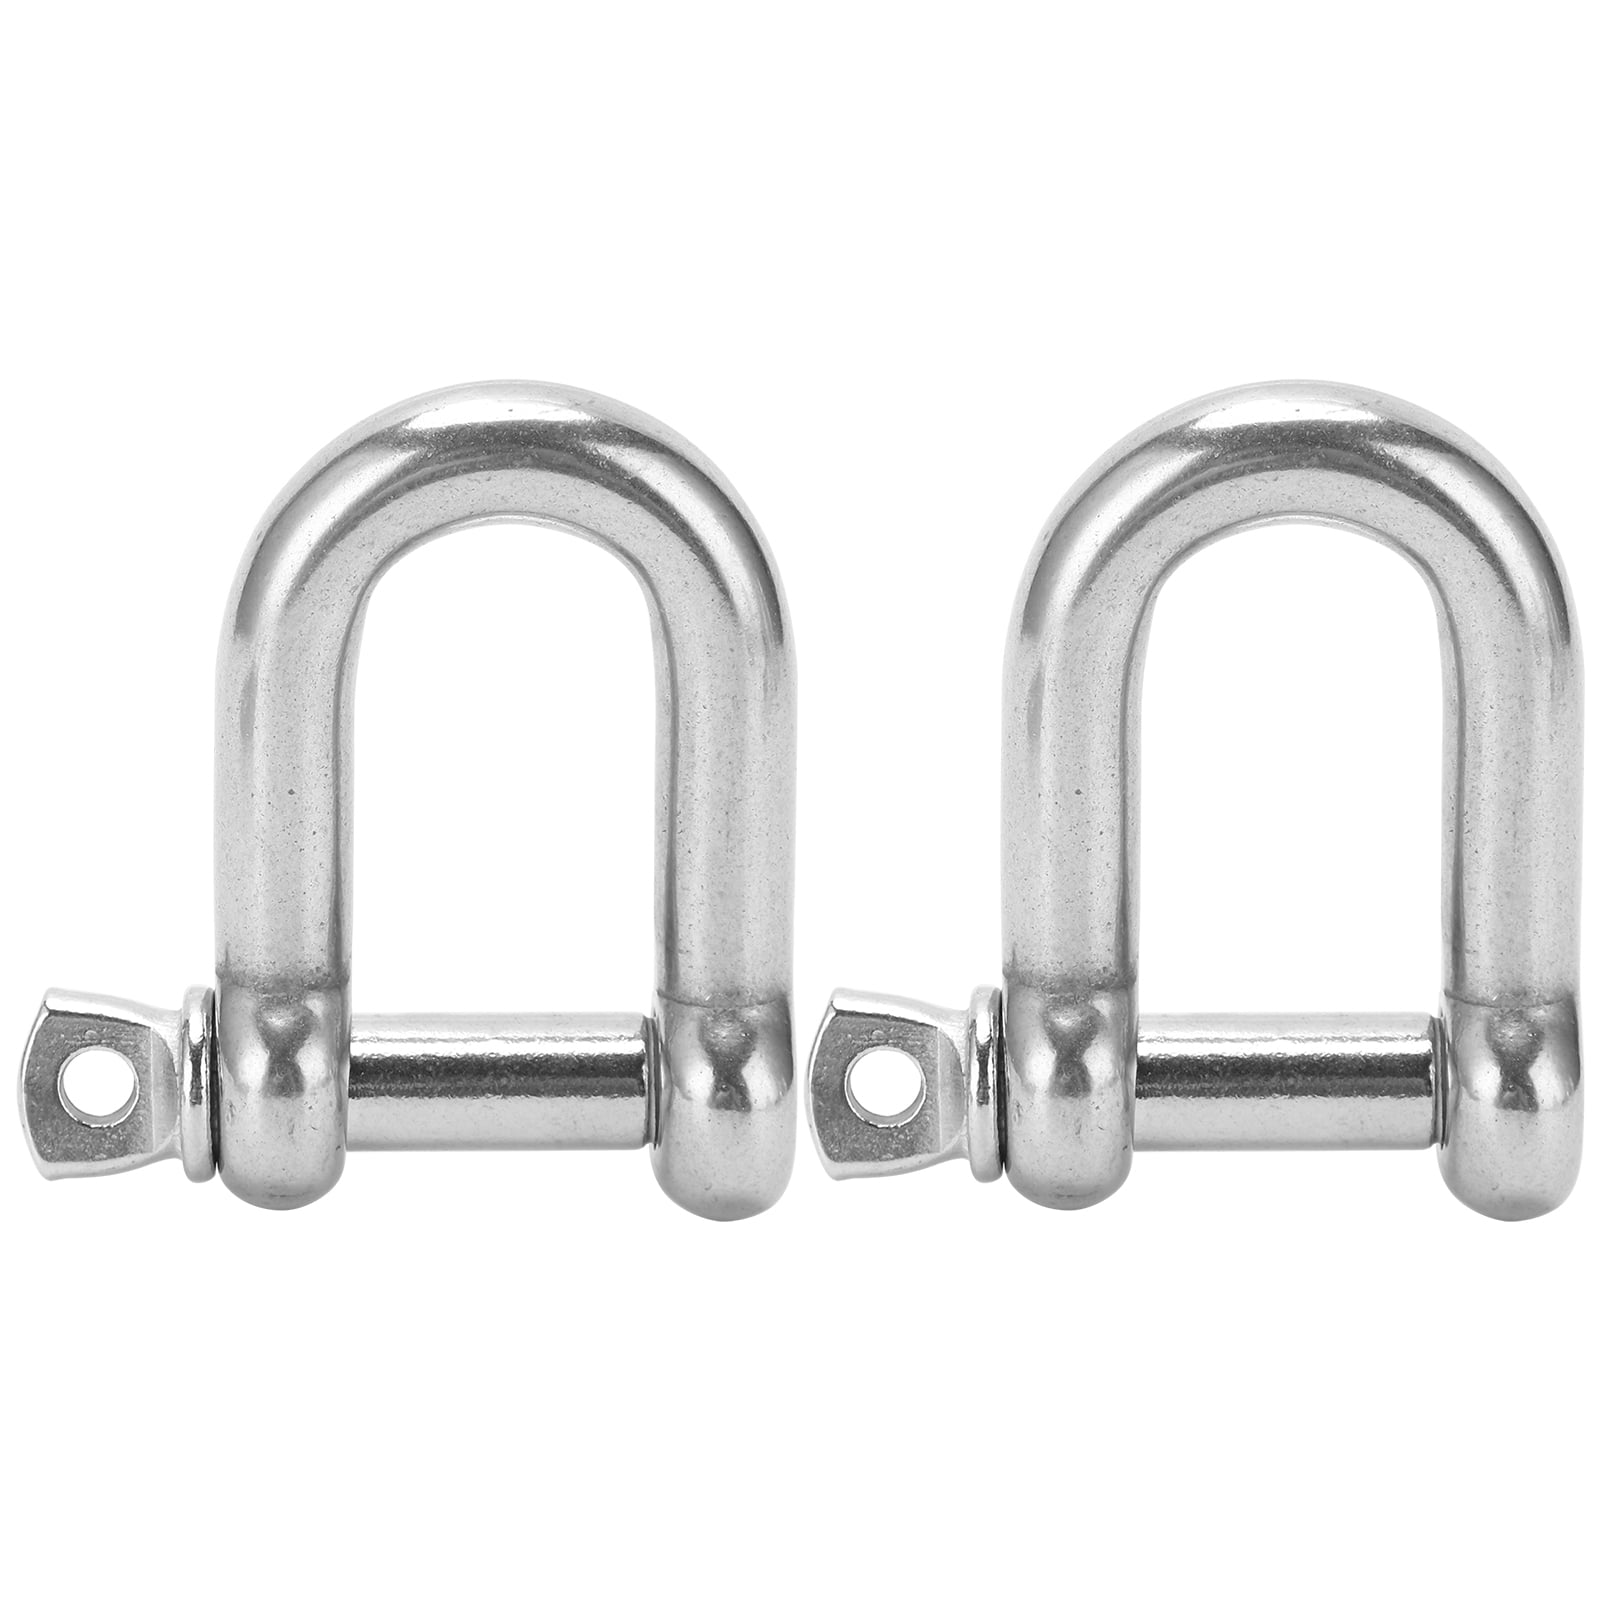 5 Pack 1/2 D Shackle Stainless Steel D Paracord Rigging Marine